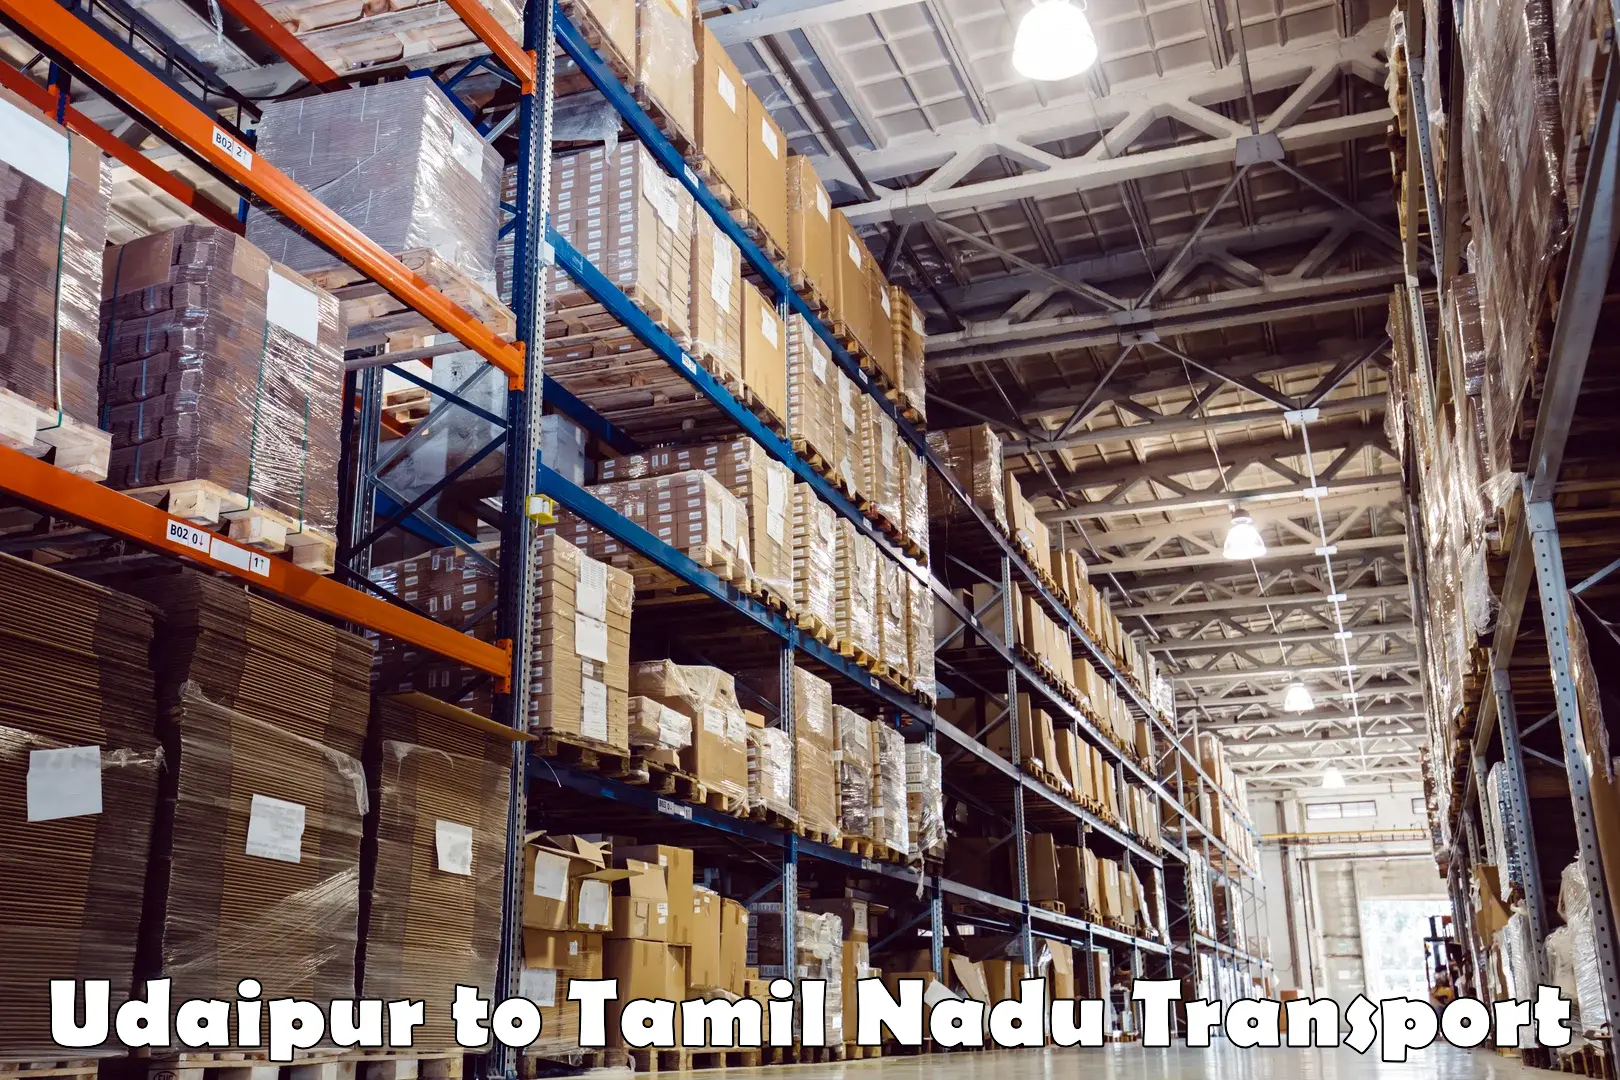 Delivery service Udaipur to Chennai Port